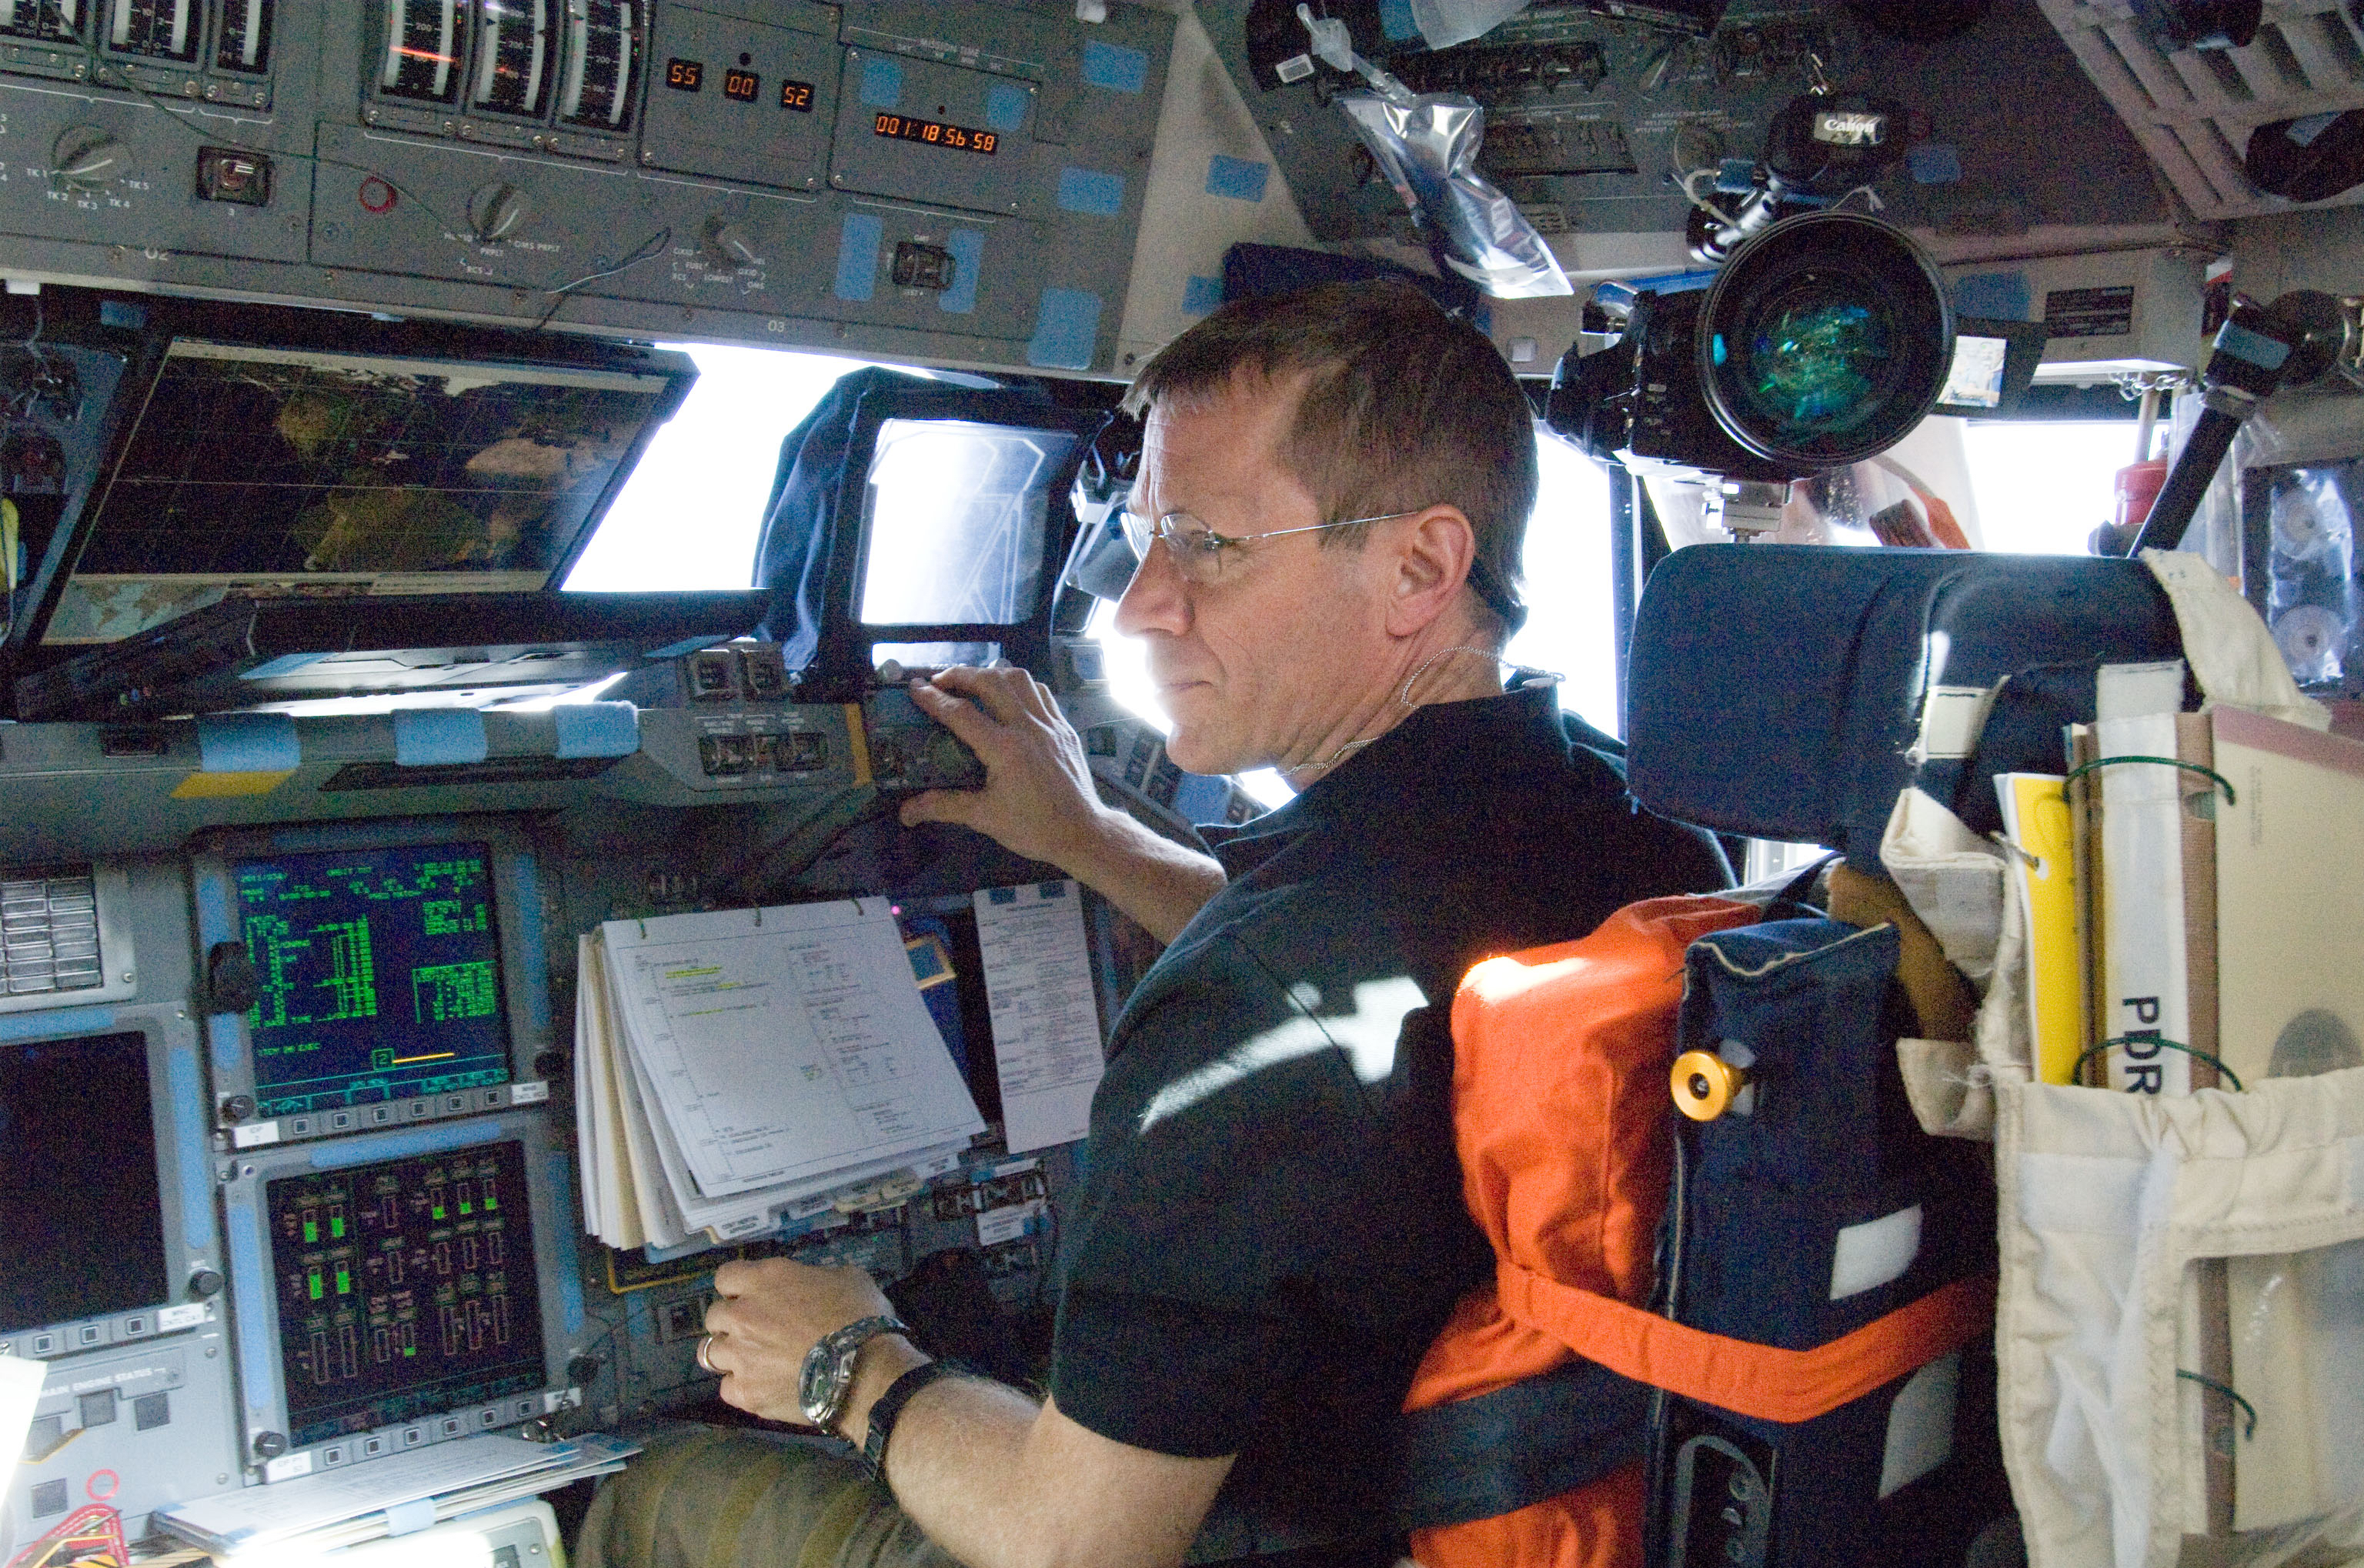 The shuttle pilot is at his station on the flight deck.